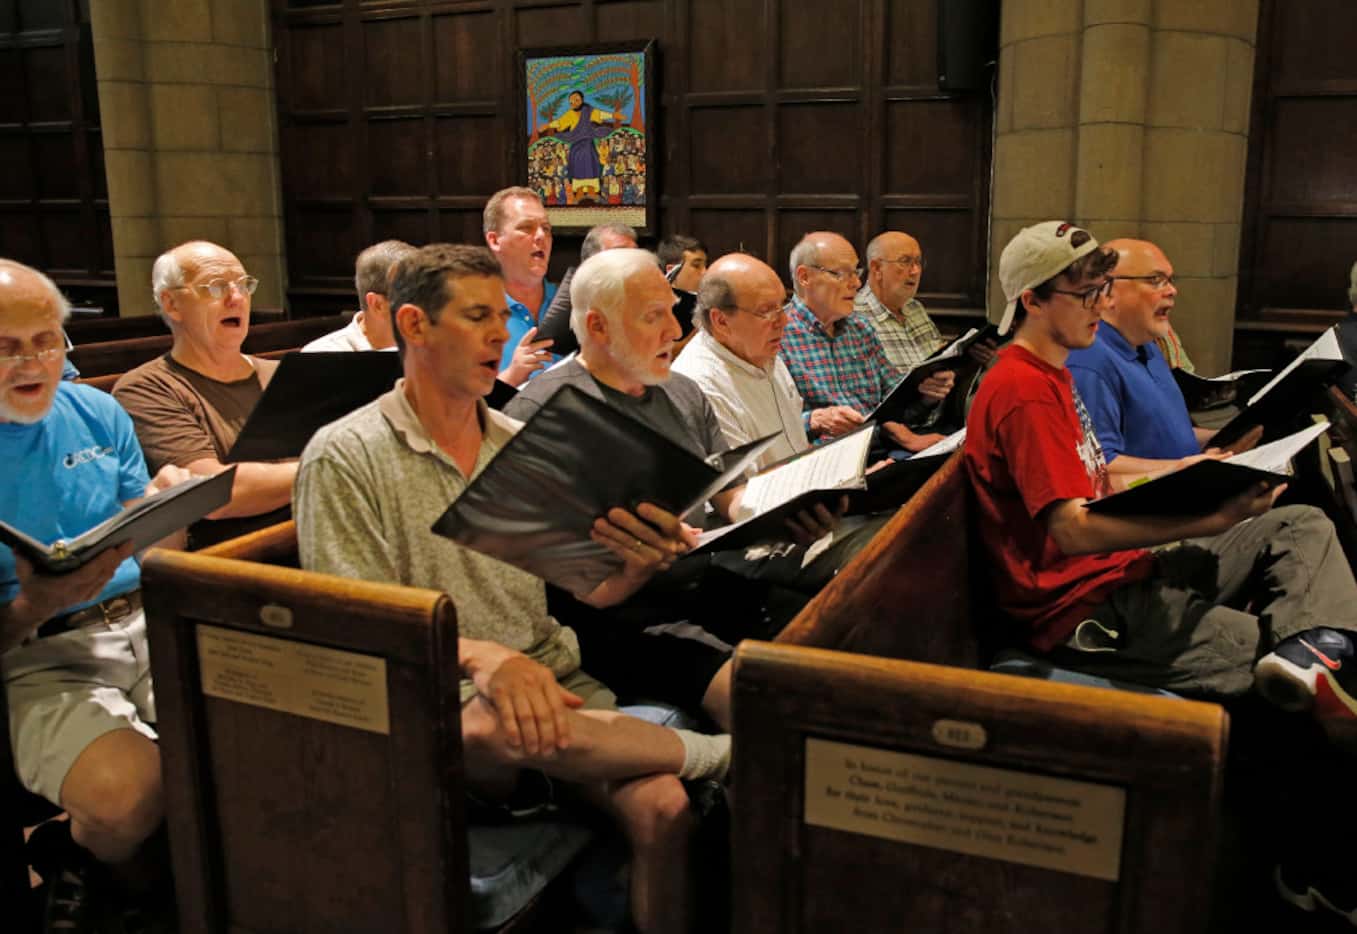 Members of the Credo choir, made up of residents of a New York City shelter, practice for...